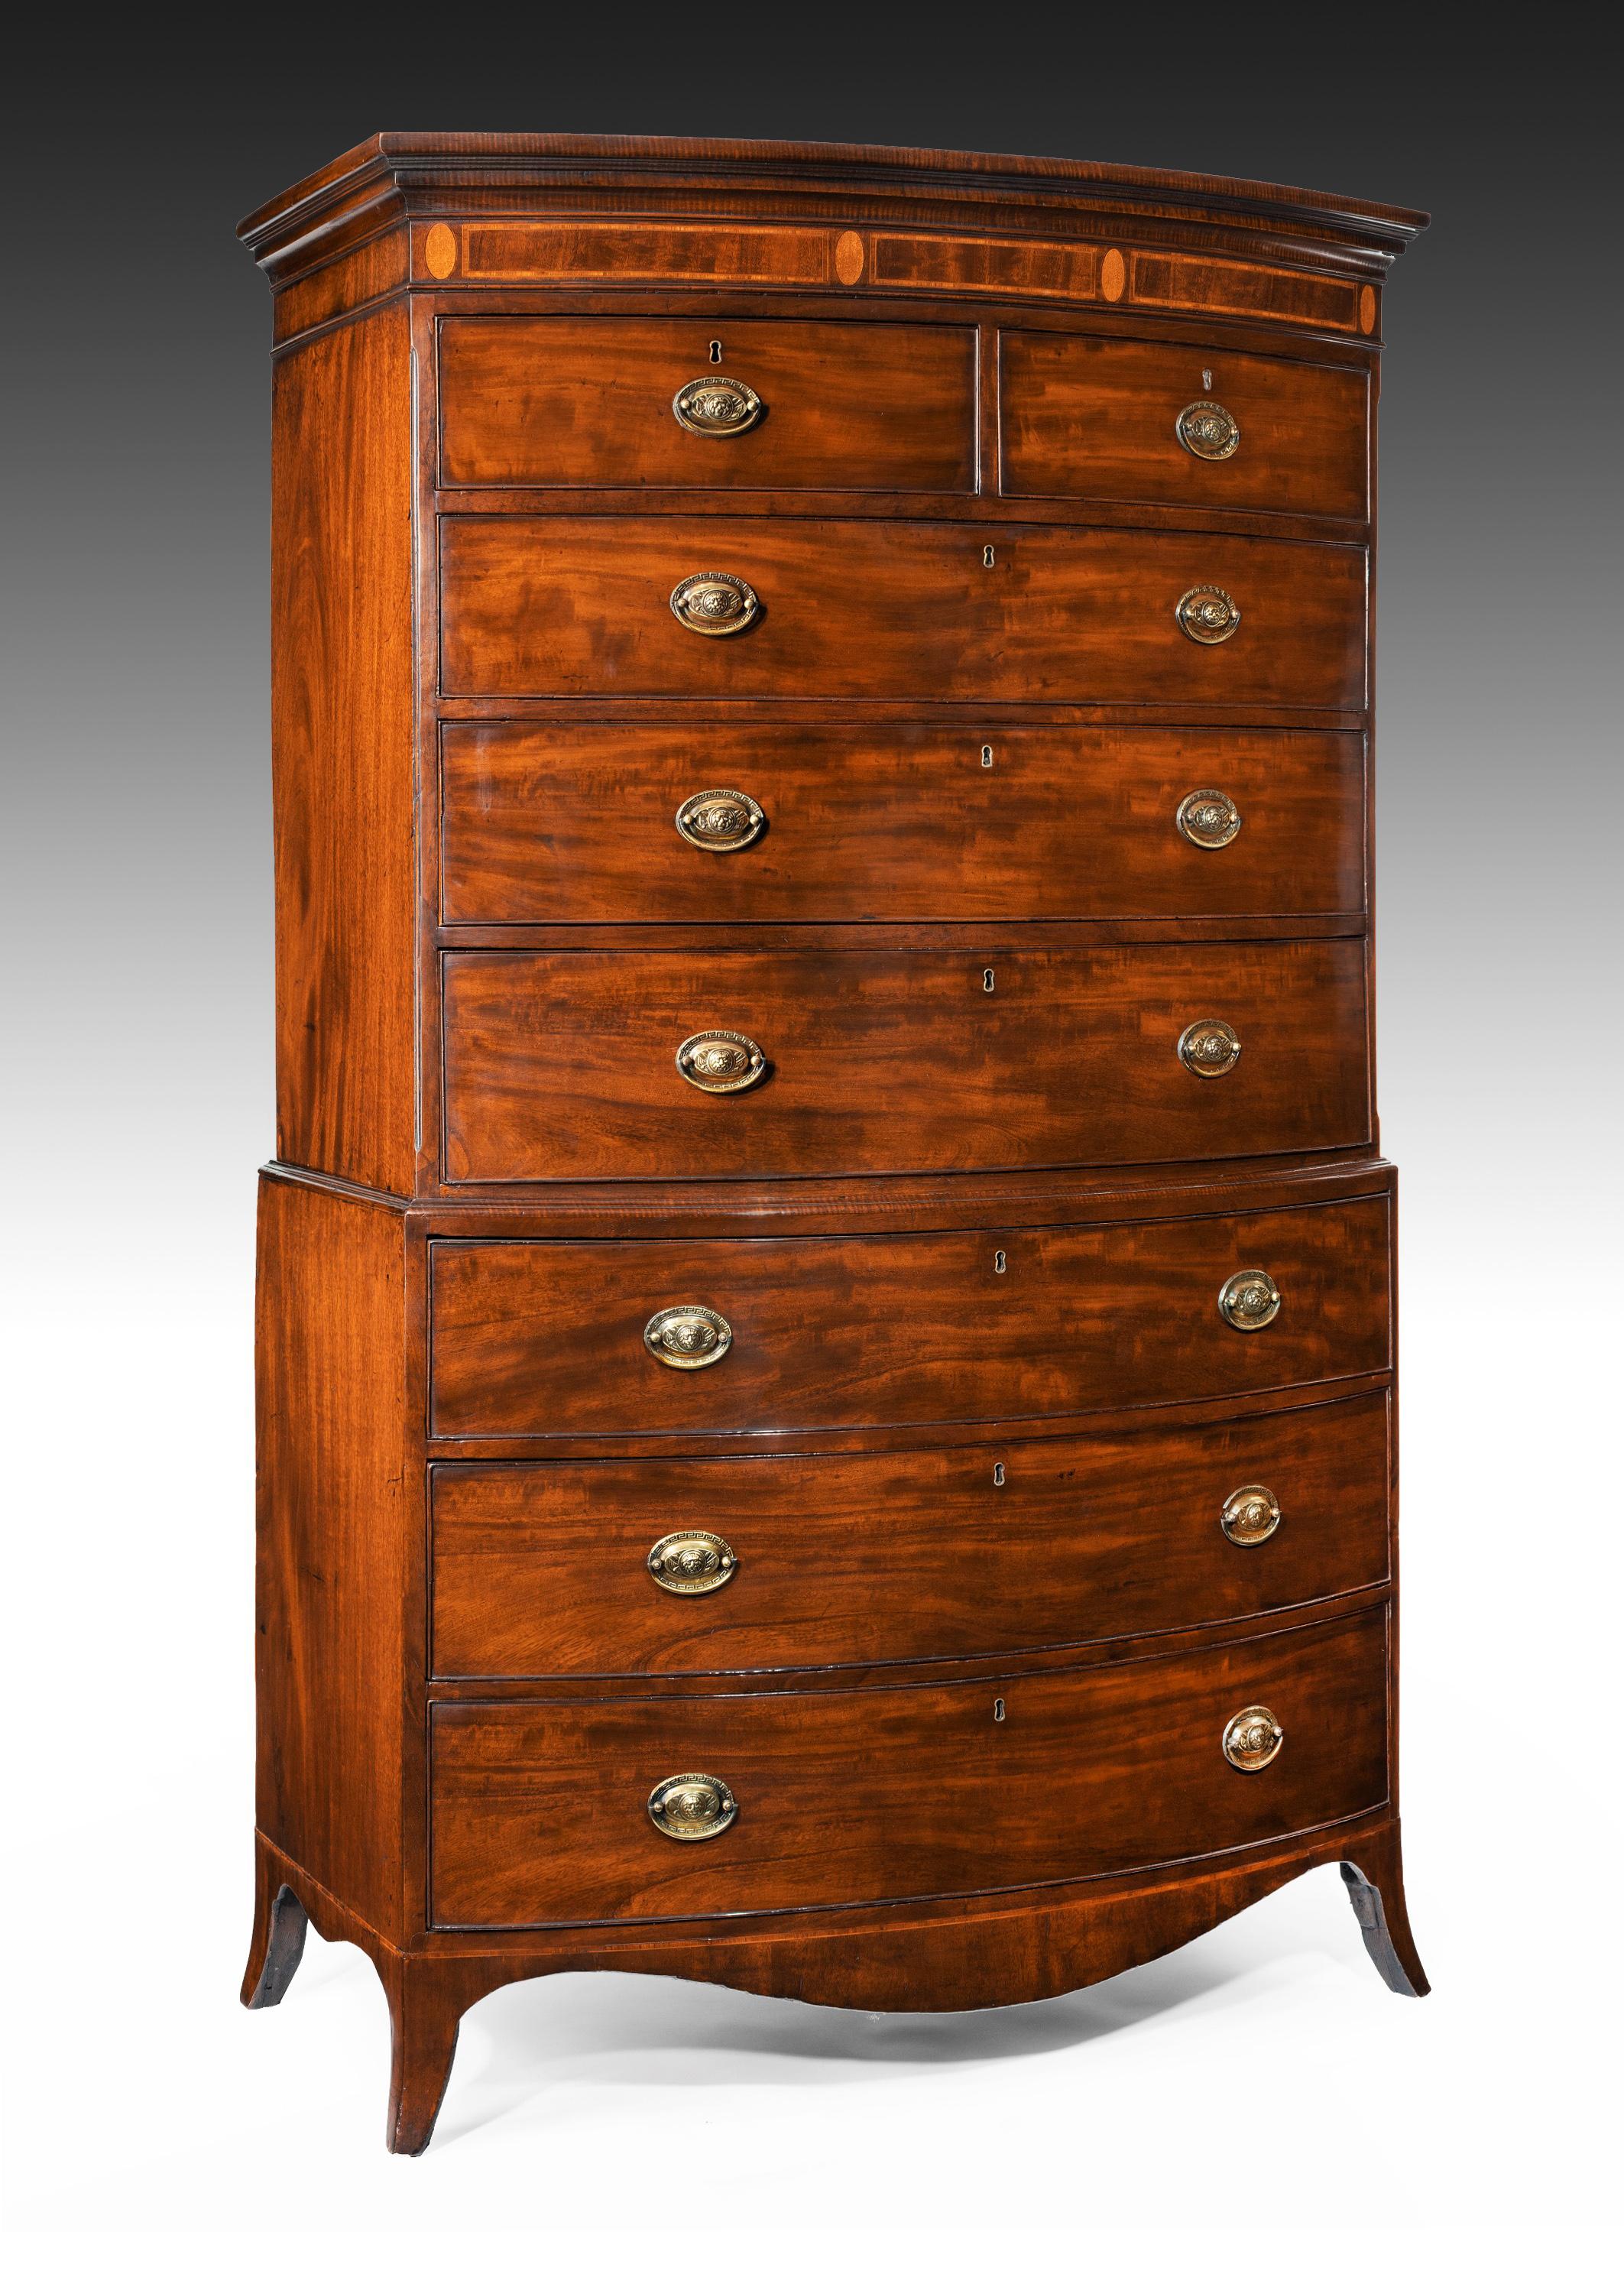 A good quality antique George III period figured mahogany bow fronted tallboy / chest on chest.

English circa 1790.

The fiddle back mahogany timbered bow cornice having a moulded edge over a boxwood strung and satinwood inlaid frieze,